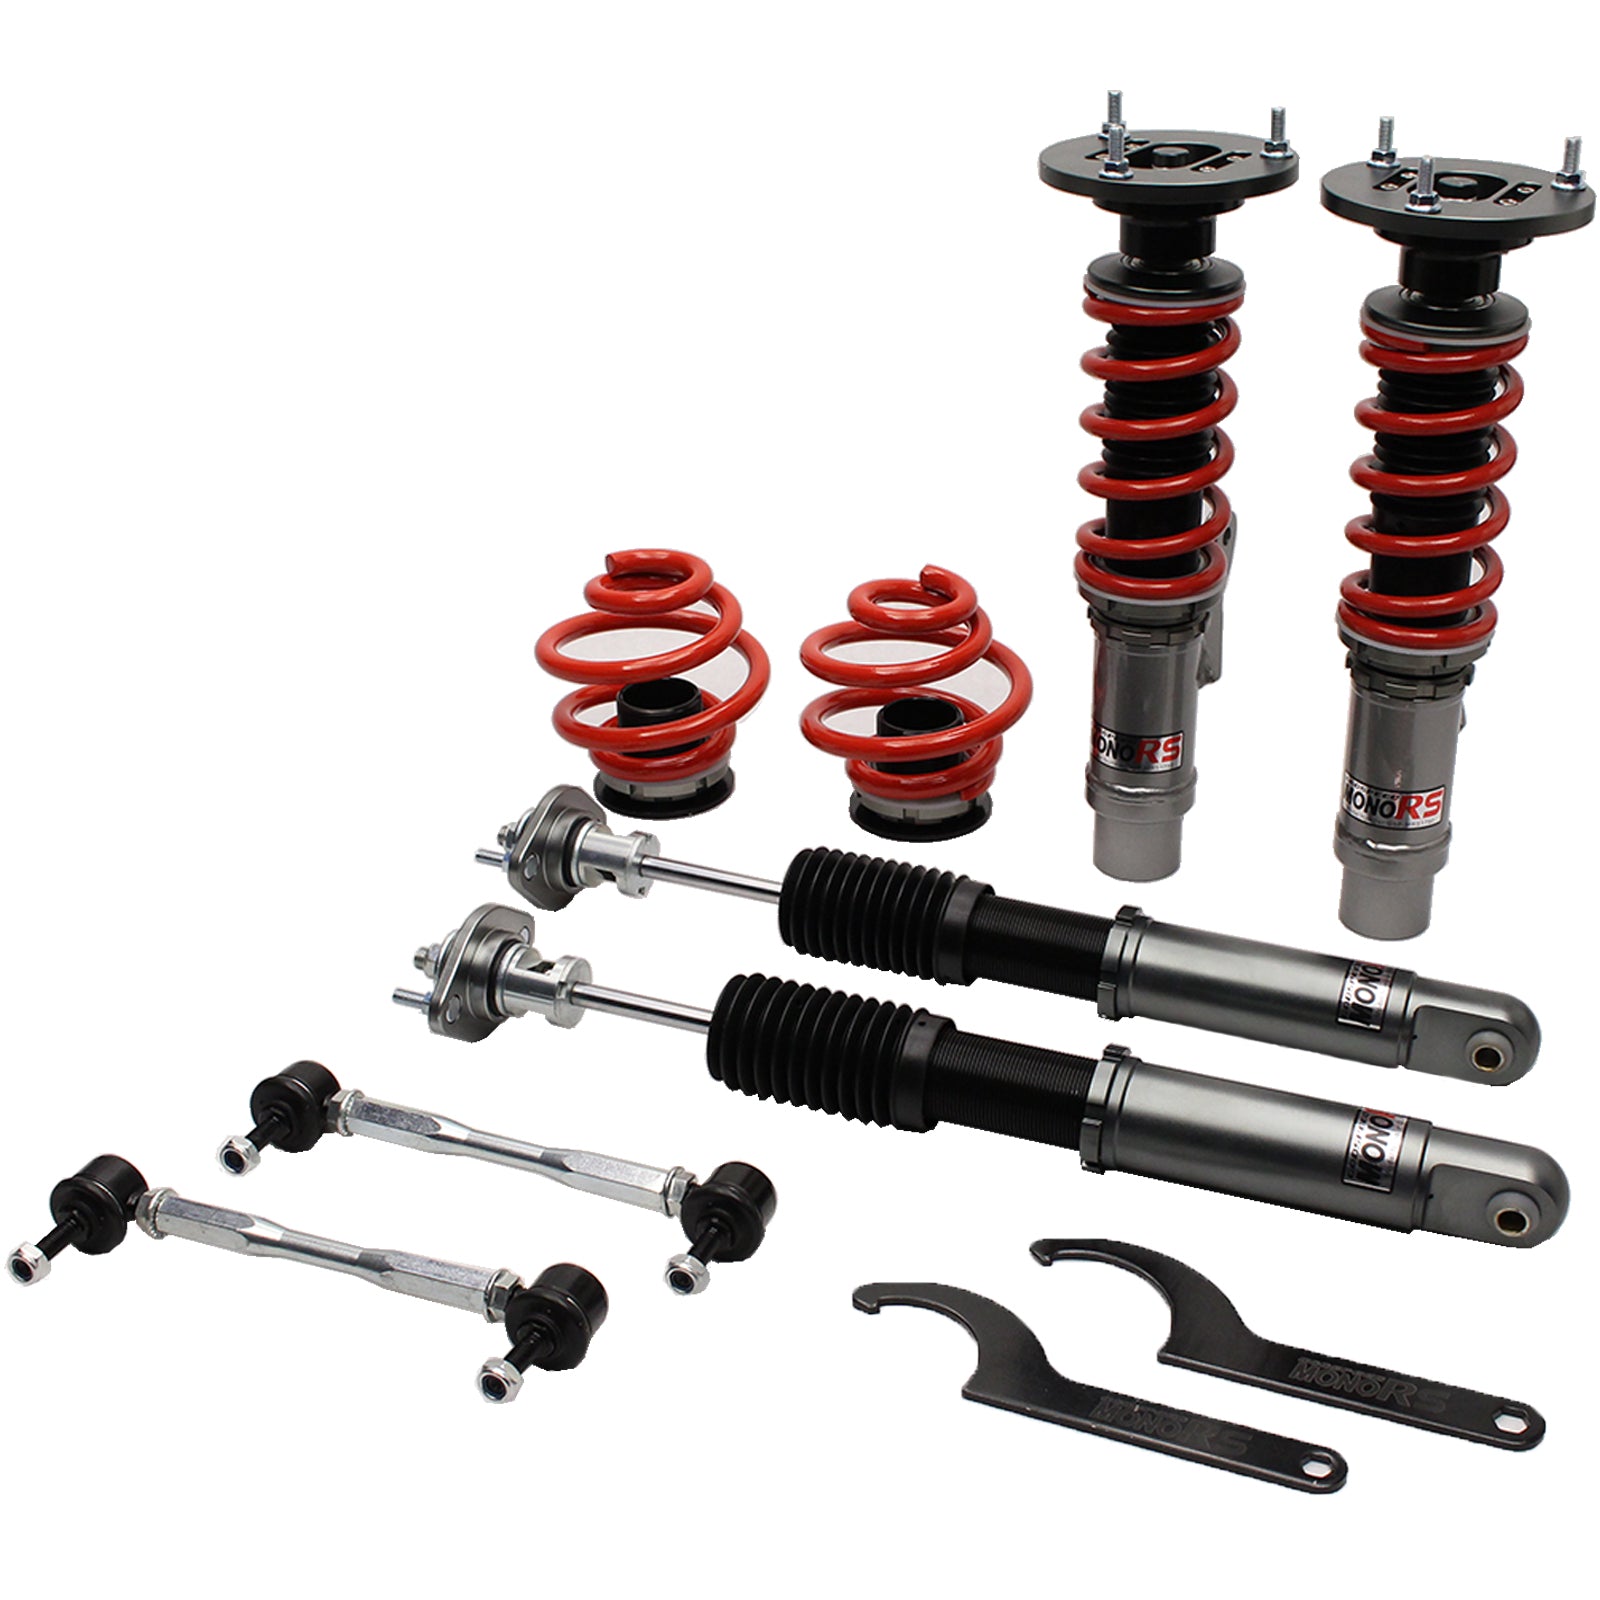 Godspeed MRS1780 MonoRS Coilover Lowering Kit, 32 Damping Adjustment, Ride Height Adjustable